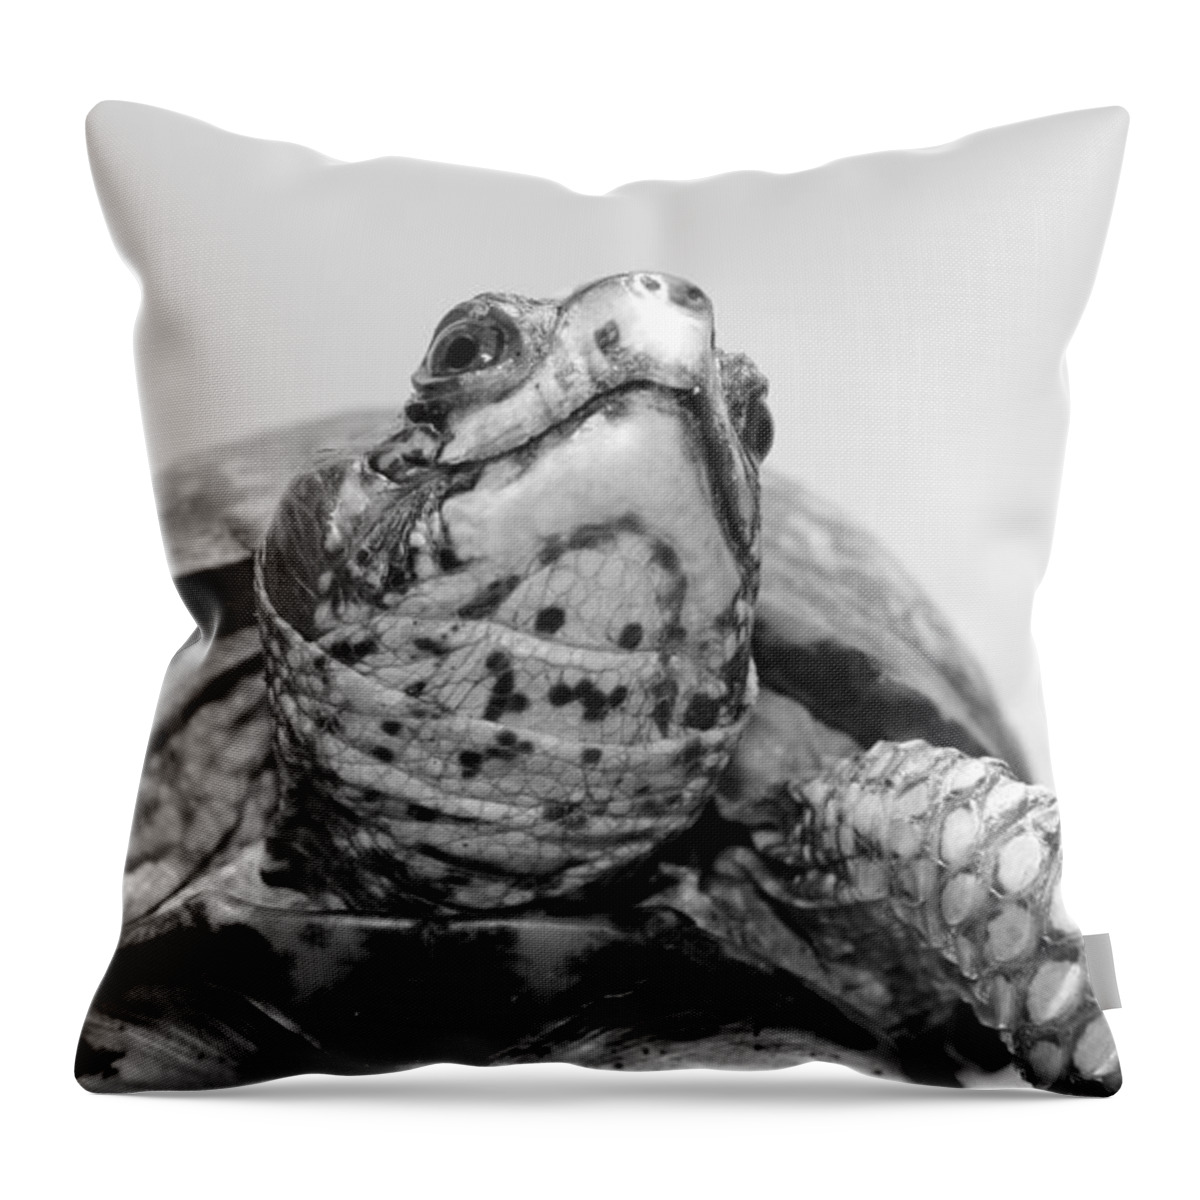 Box Turtle Throw Pillow featuring the photograph Boxy by Tammy Schneider